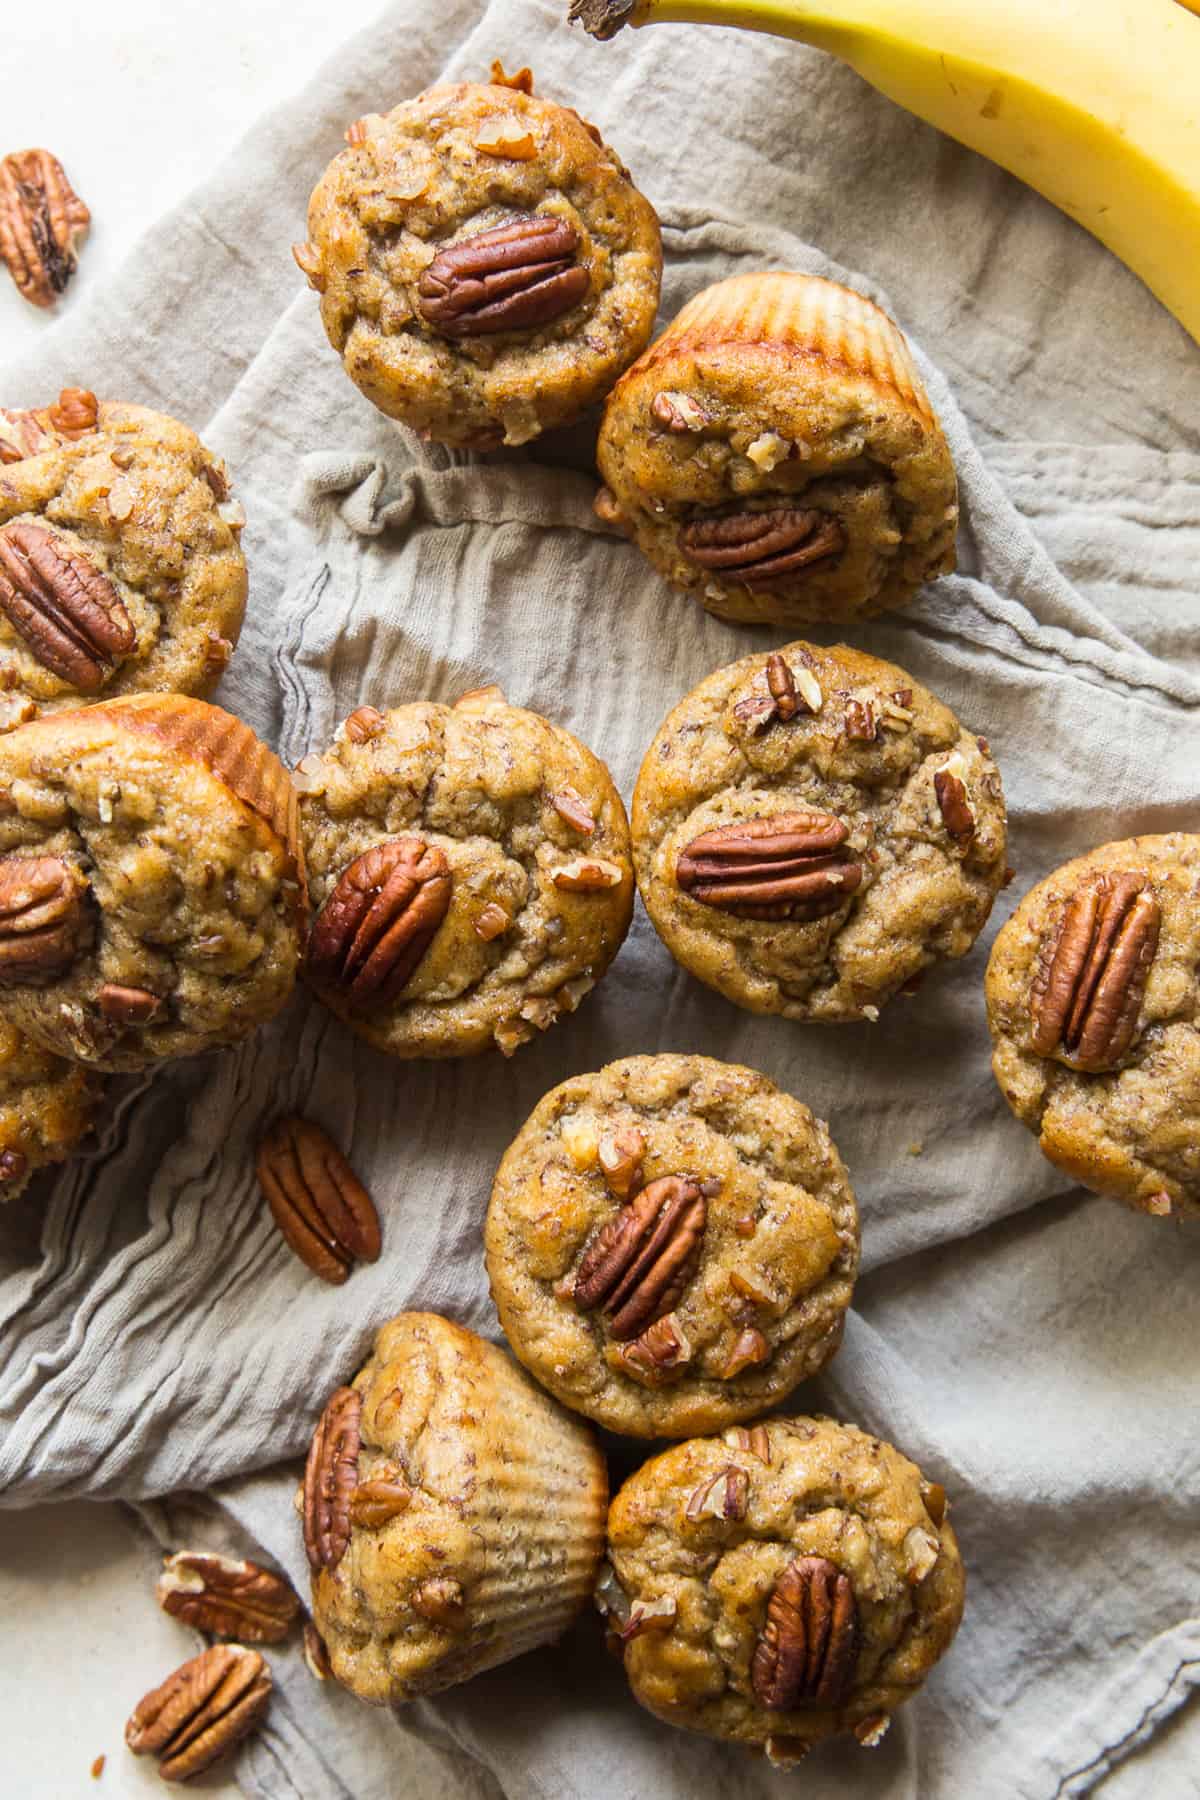 Muffins topped with pecans piled on a grey cloth.